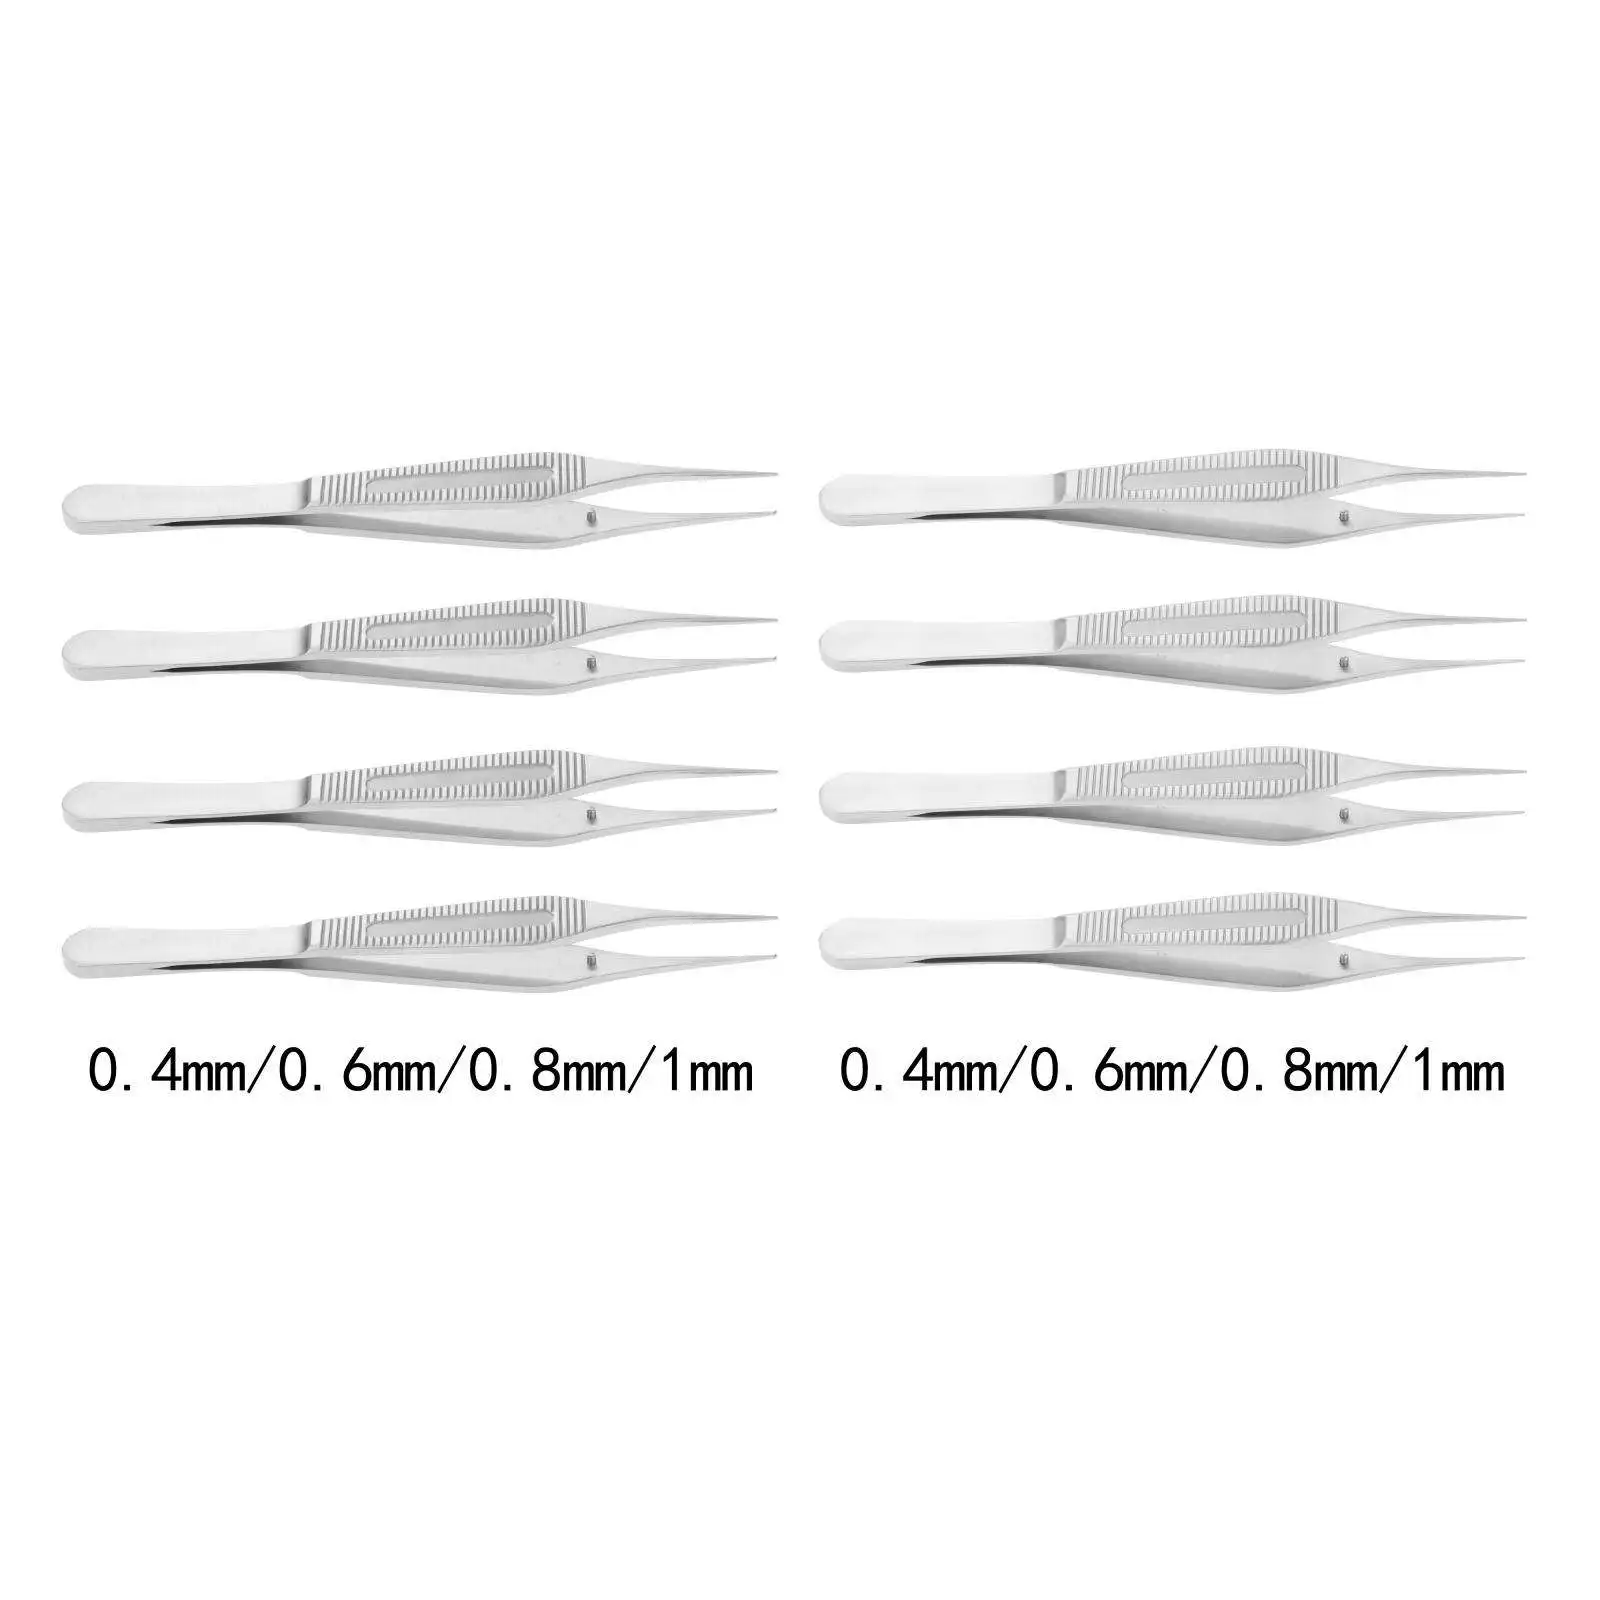 Long Fat Tweezers Compact Pointed Stainless Steel Makeup Tool Micro Forceps for Microscopes Jewelry DIY Craft Beading Hotel